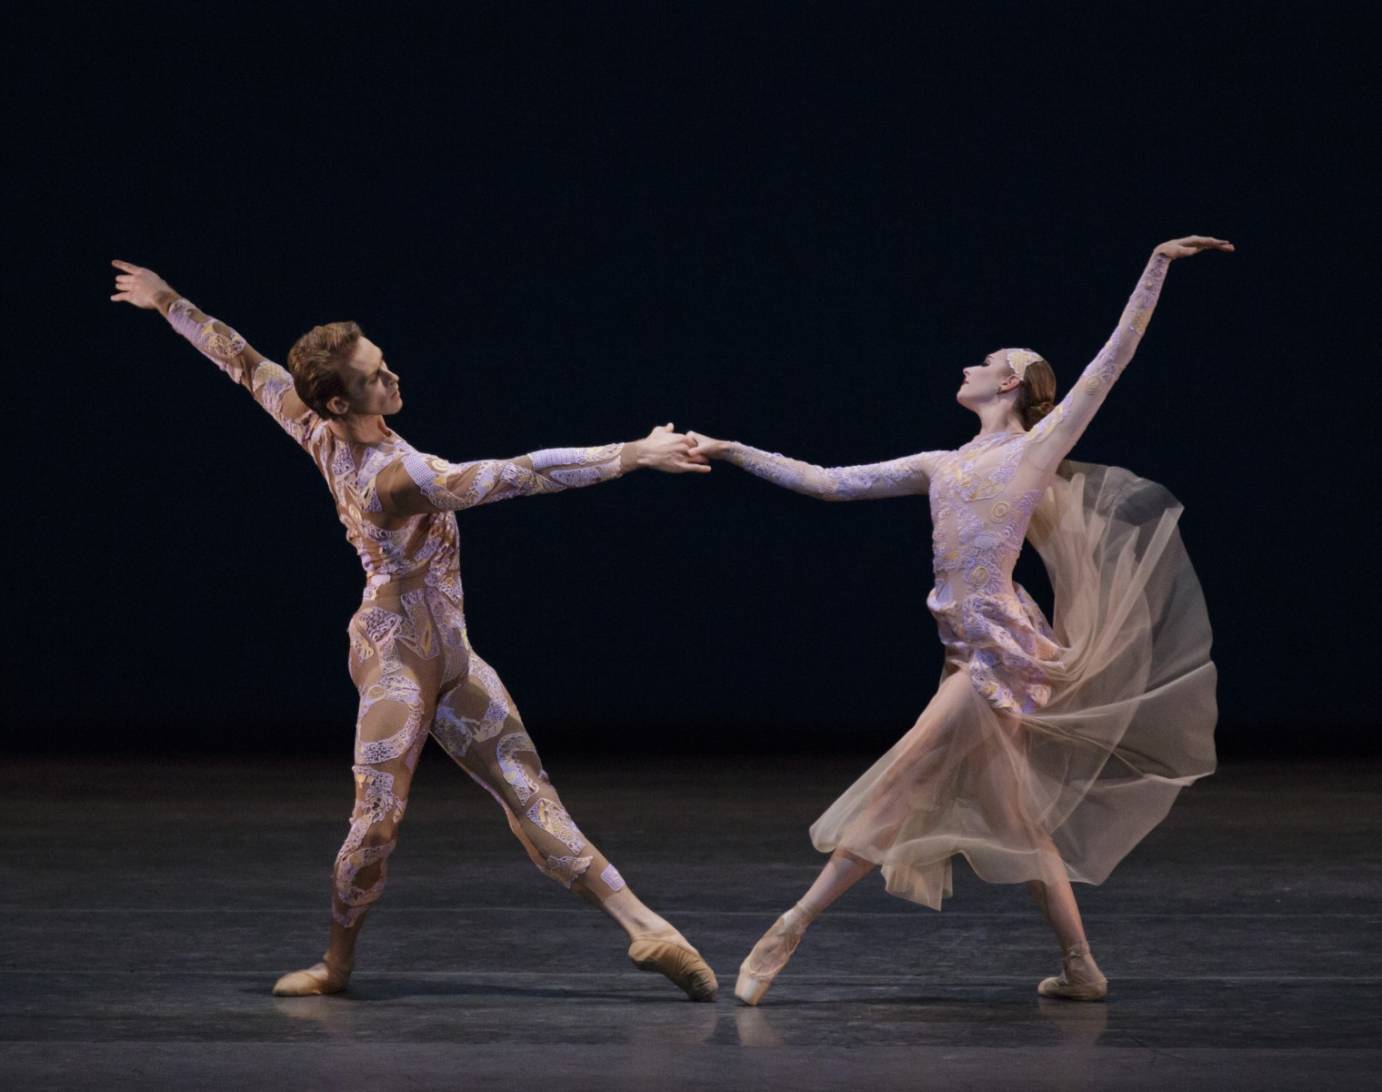 Adrian Danchig-Waring and Ashley Laracey in Justin Peck's Belles-Lettres, in costumes by Mary Katrantzou. Photo credit Paul Kolnik